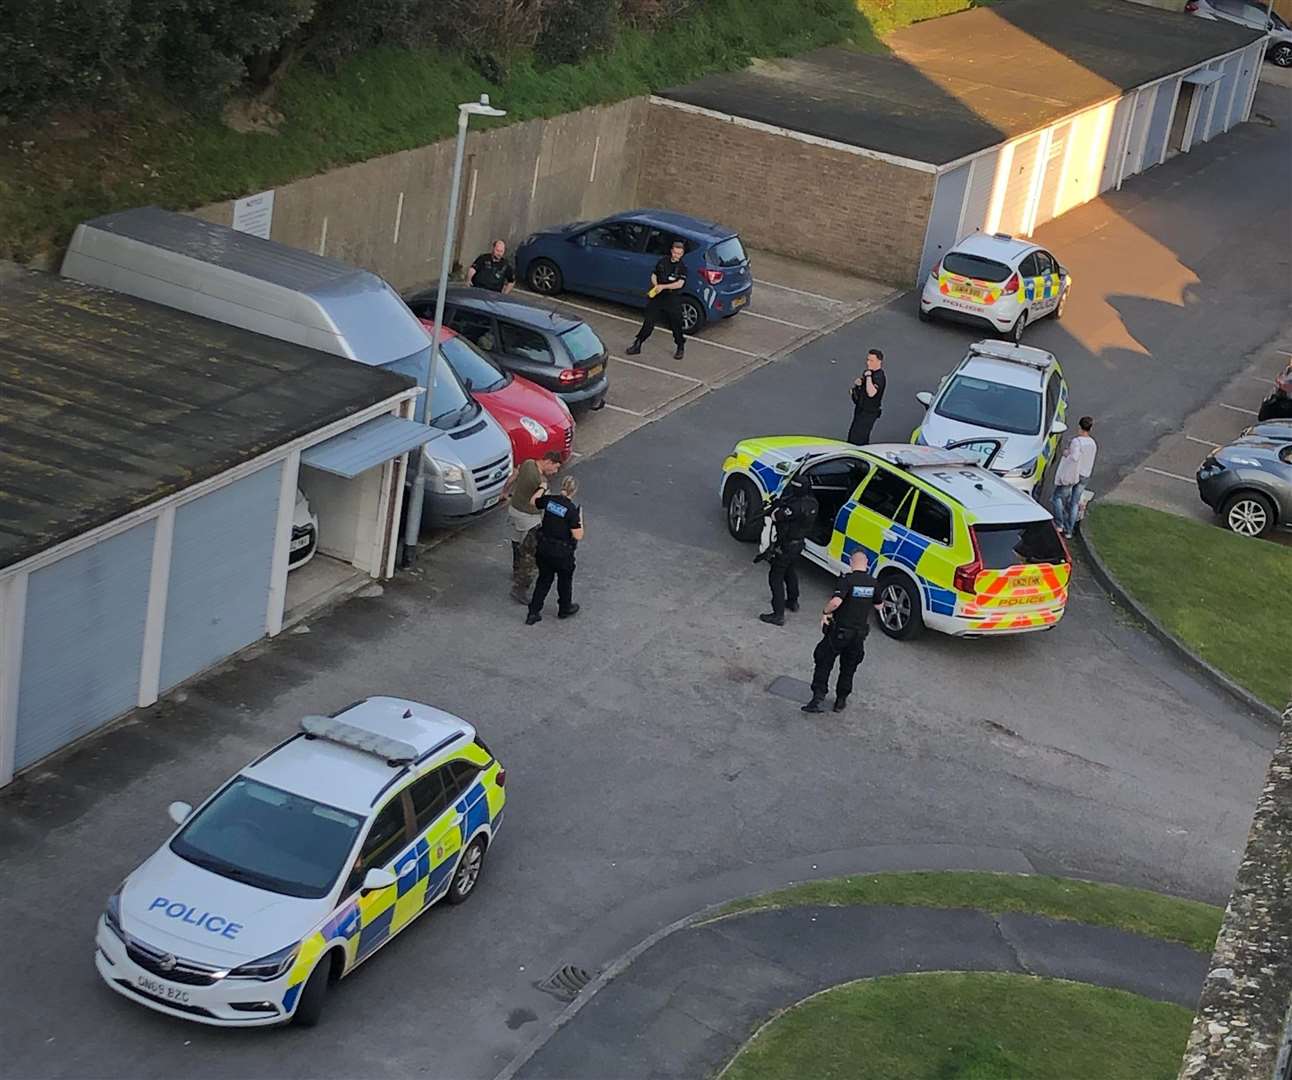 Armed patrols were called to Enbrook Valley. Picture: Jodie Harmer